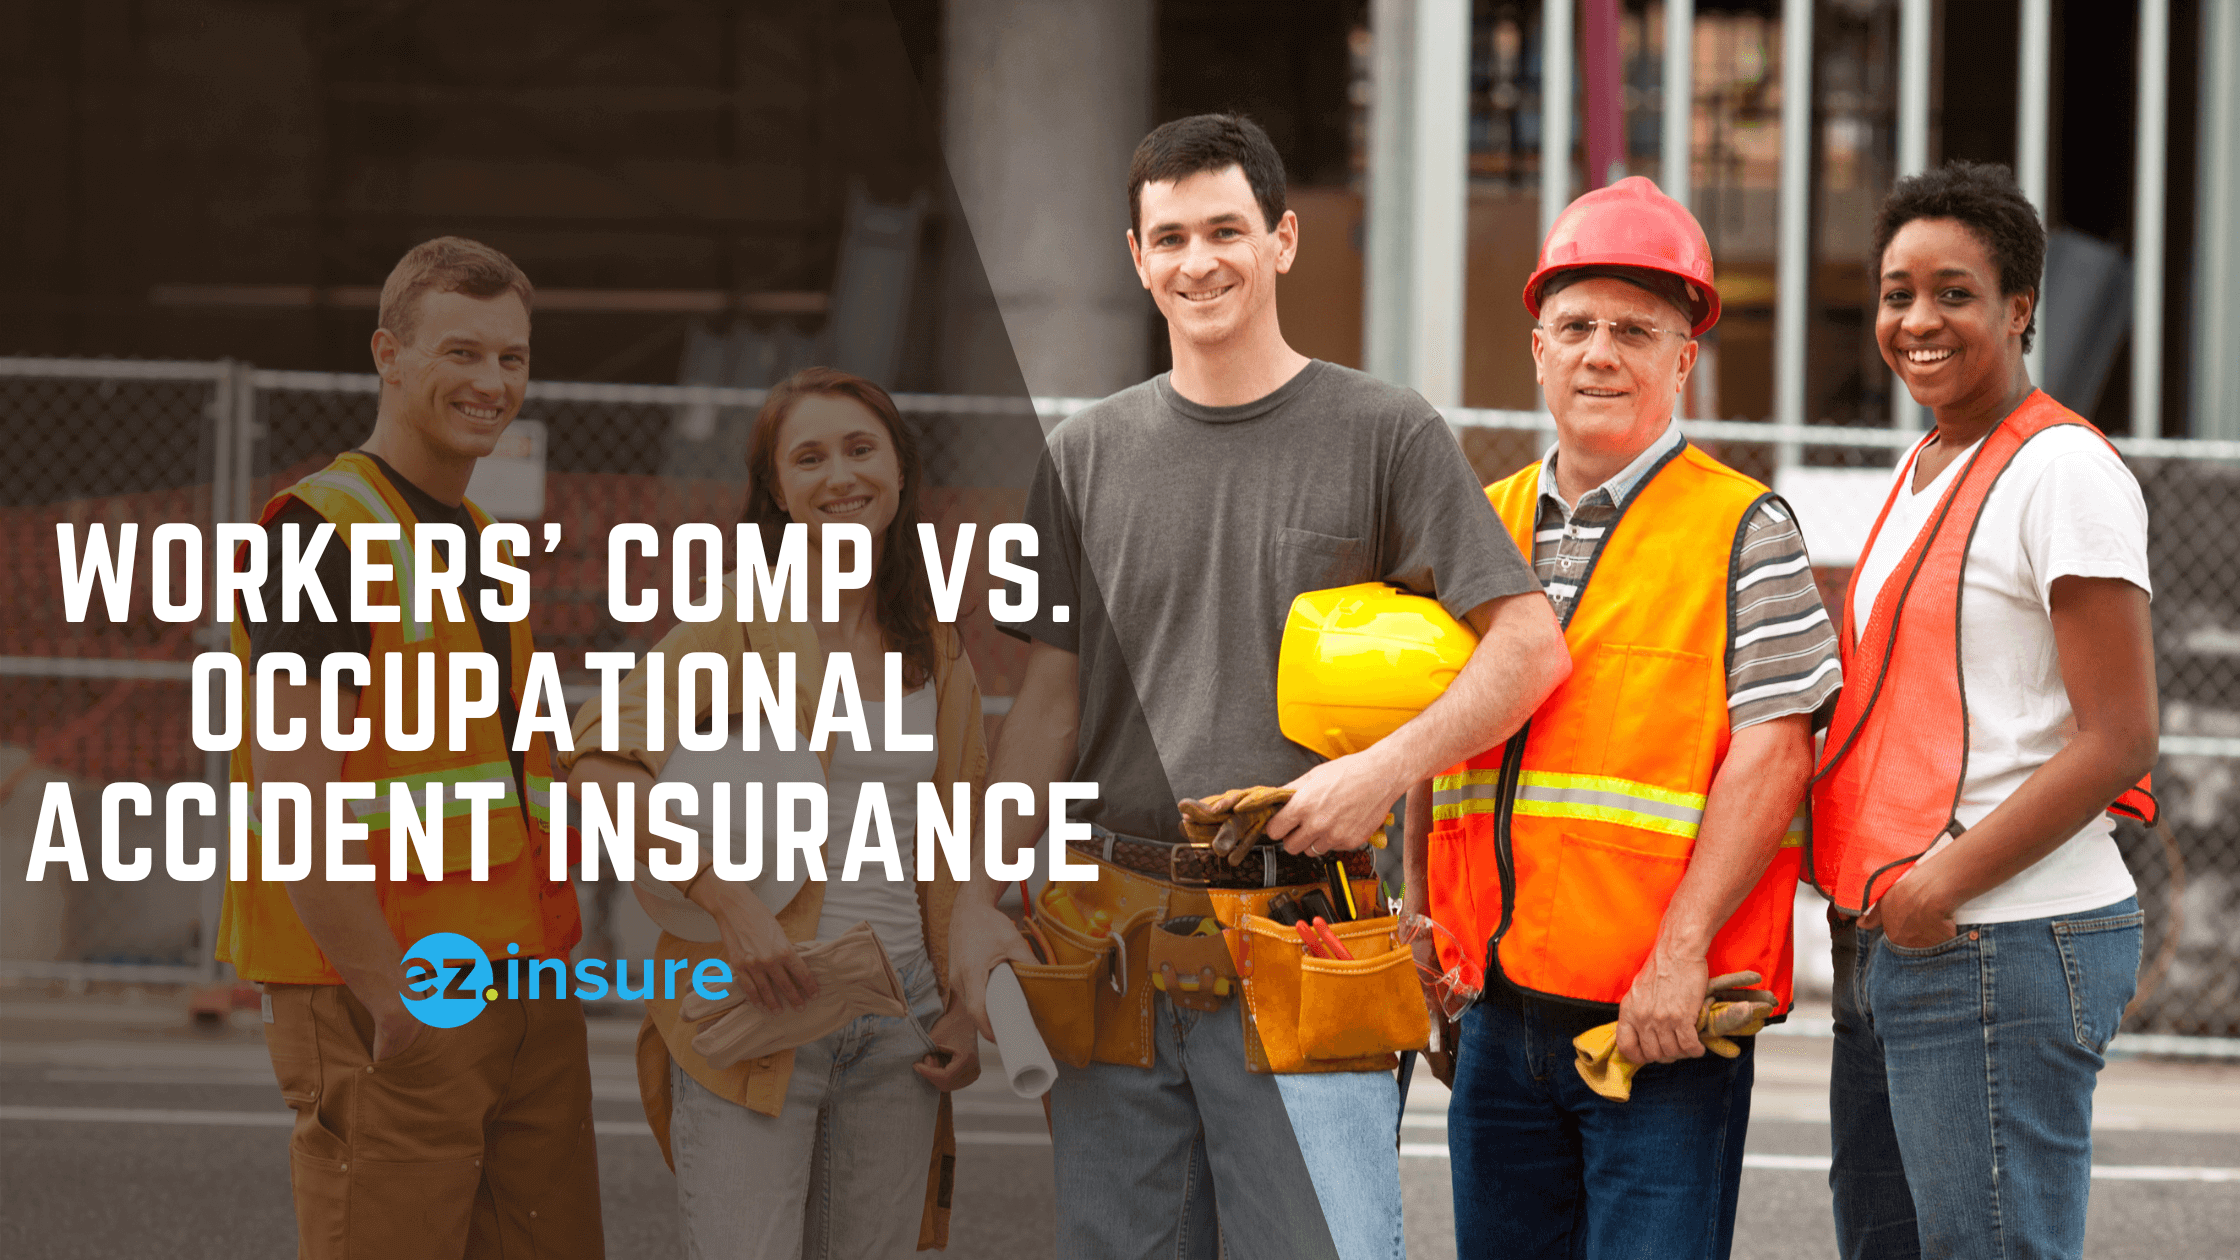 Workers' Comp vs. Occupational Accident Insurance text overlaying construction workers